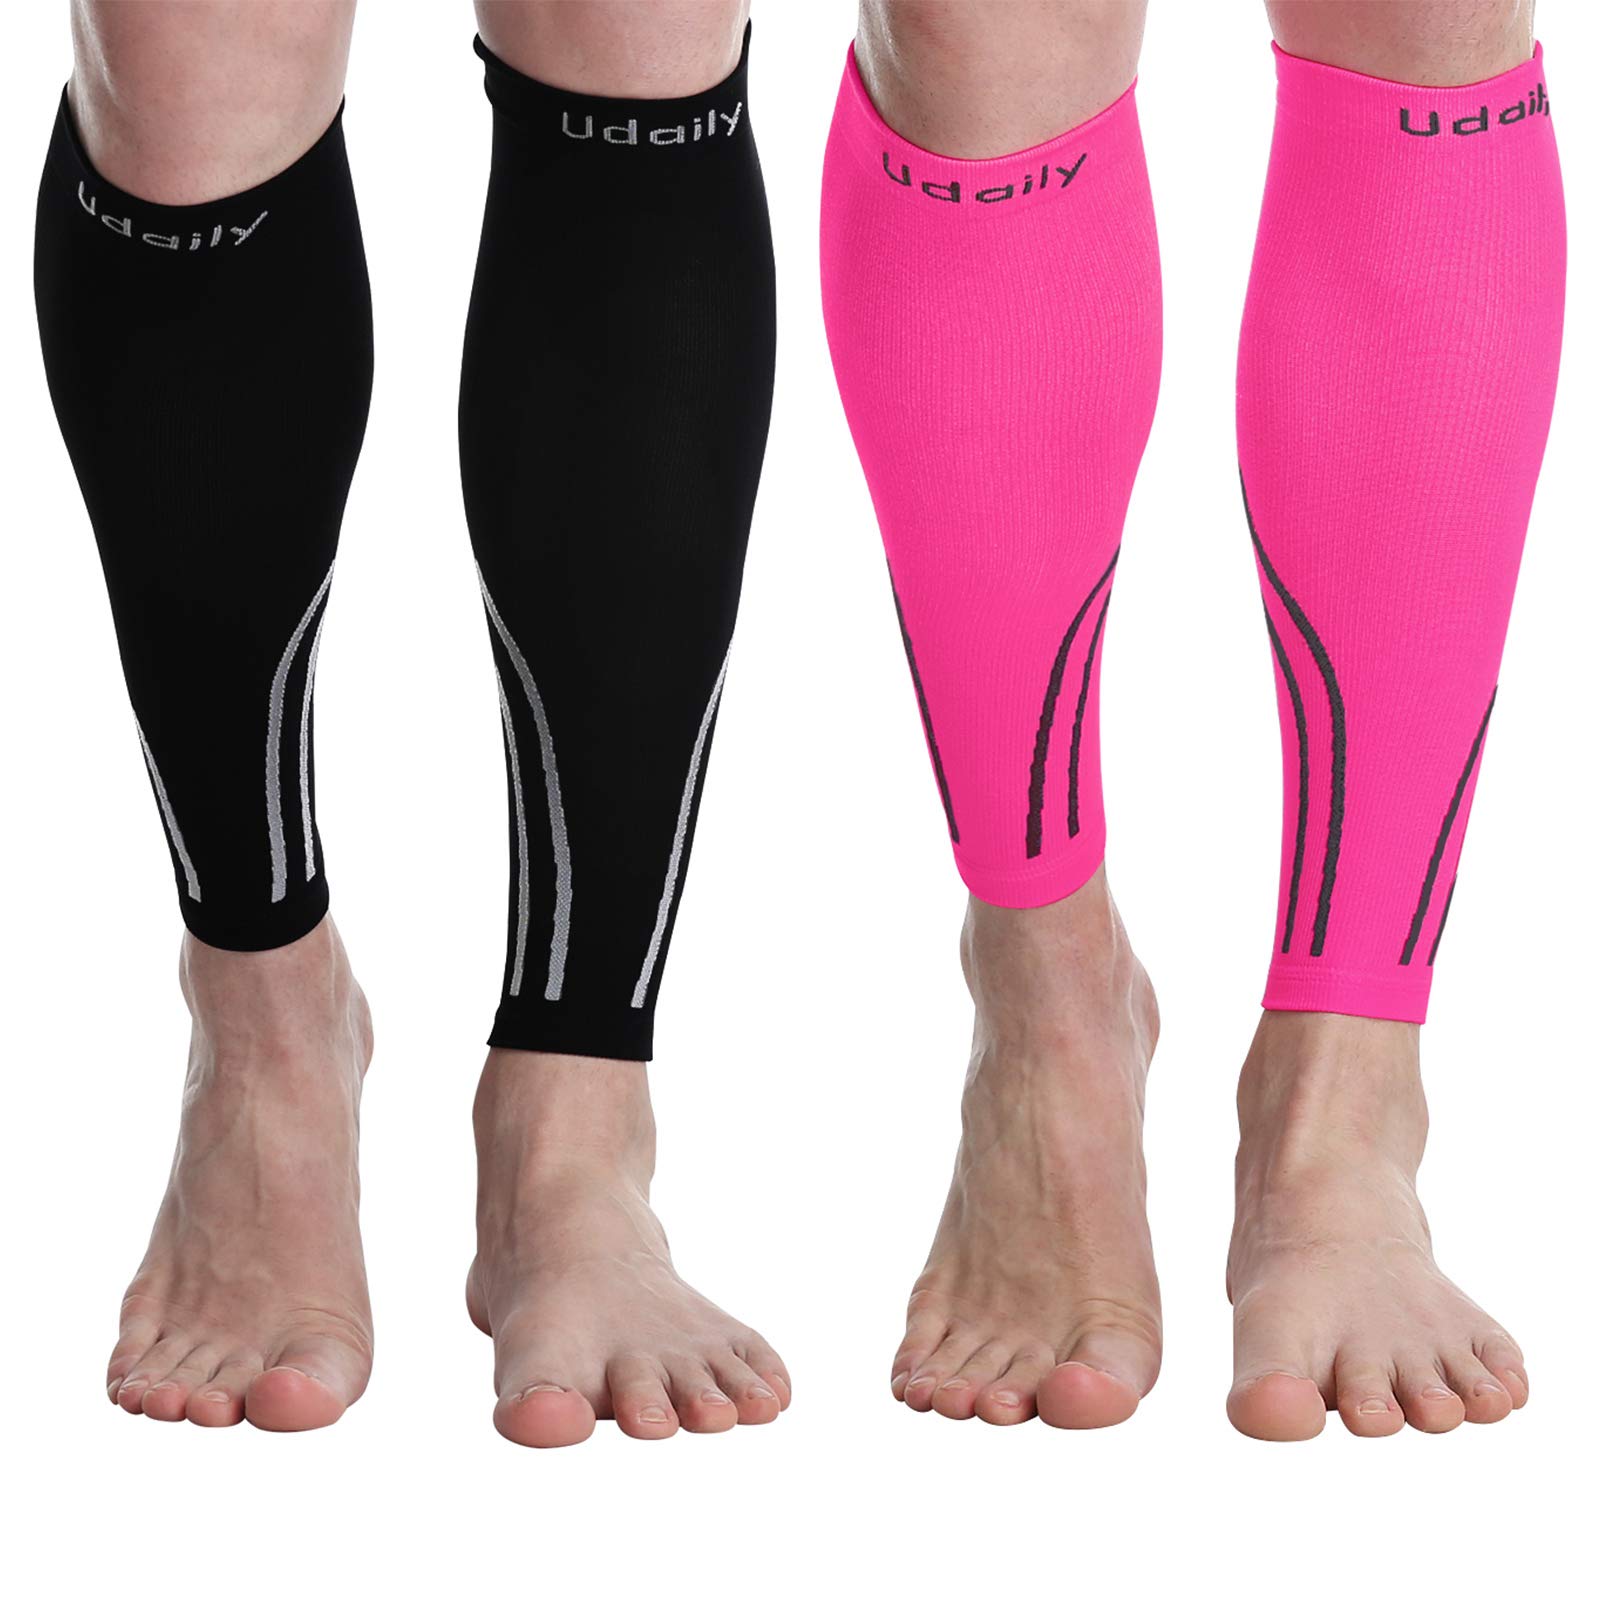 Udaily Calf Compression Sleeves for Men & Women (20-30mmhg) - Calf Support  Leg Compression Socks for Shin Splint & Calf Pain Relief M(Calf 12.5-15)  2 Pairs (Black,pink)